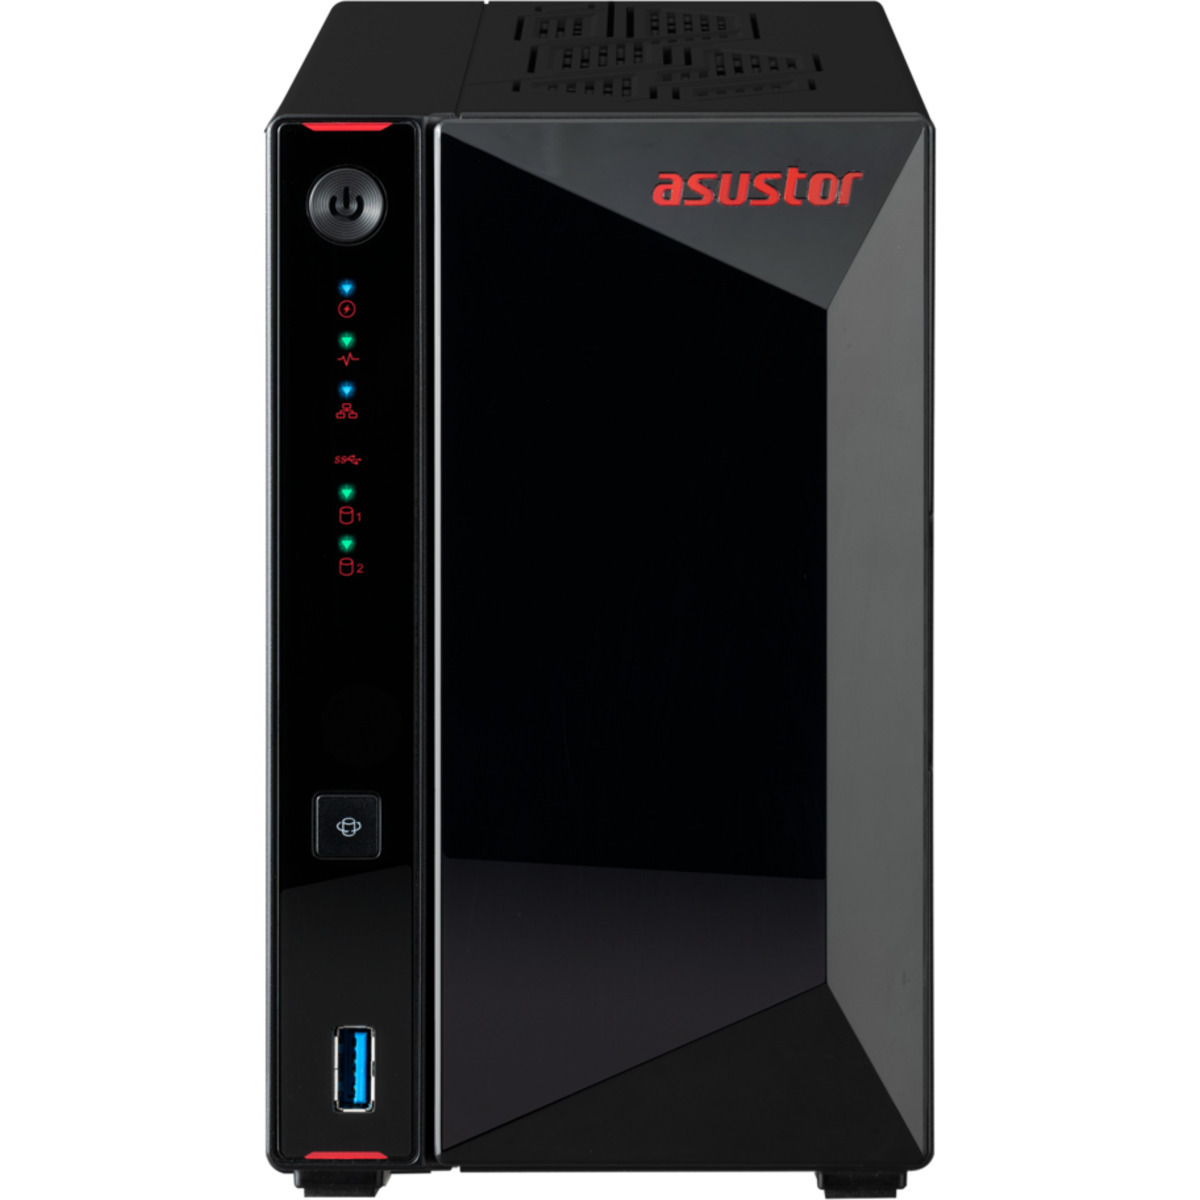 ASUSTOR Nimbustor 2 Gen2 AS5402T 4tb 2-Bay Desktop Multimedia / Power User / Business NAS - Network Attached Storage Device 1x4tb Seagate IronWolf Pro ST4000NT001 3.5 7200rpm SATA 6Gb/s HDD NAS Class Drives Installed - Burn-In Tested - FREE RAM UPGRADE Nimbustor 2 Gen2 AS5402T